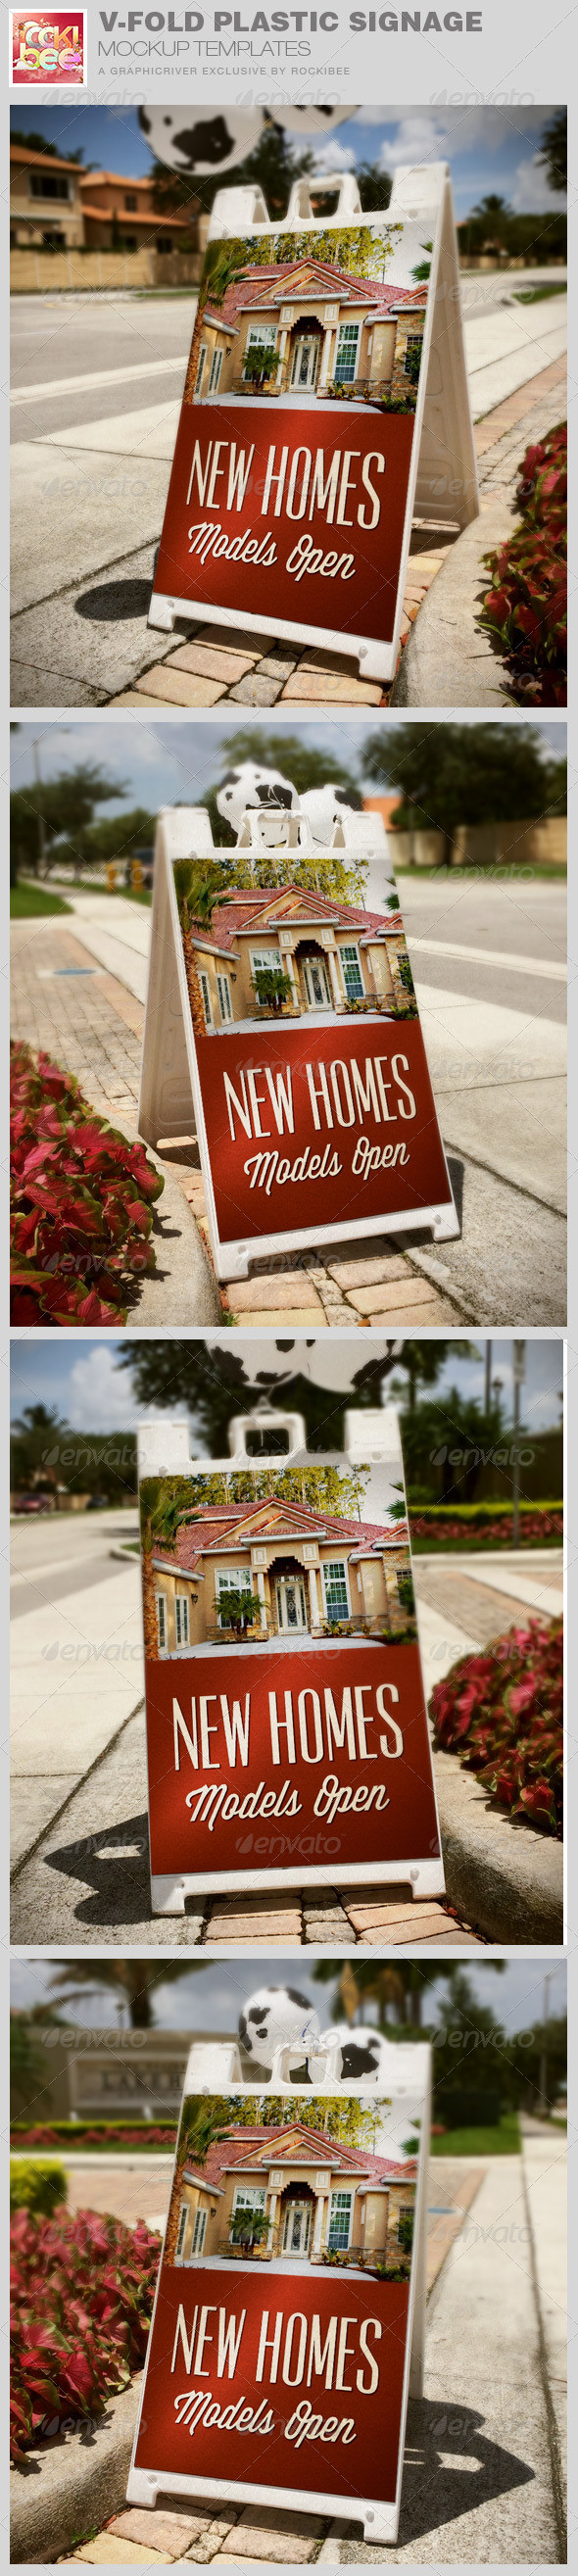 Outdoor v fold plastic signage mockup template image preview